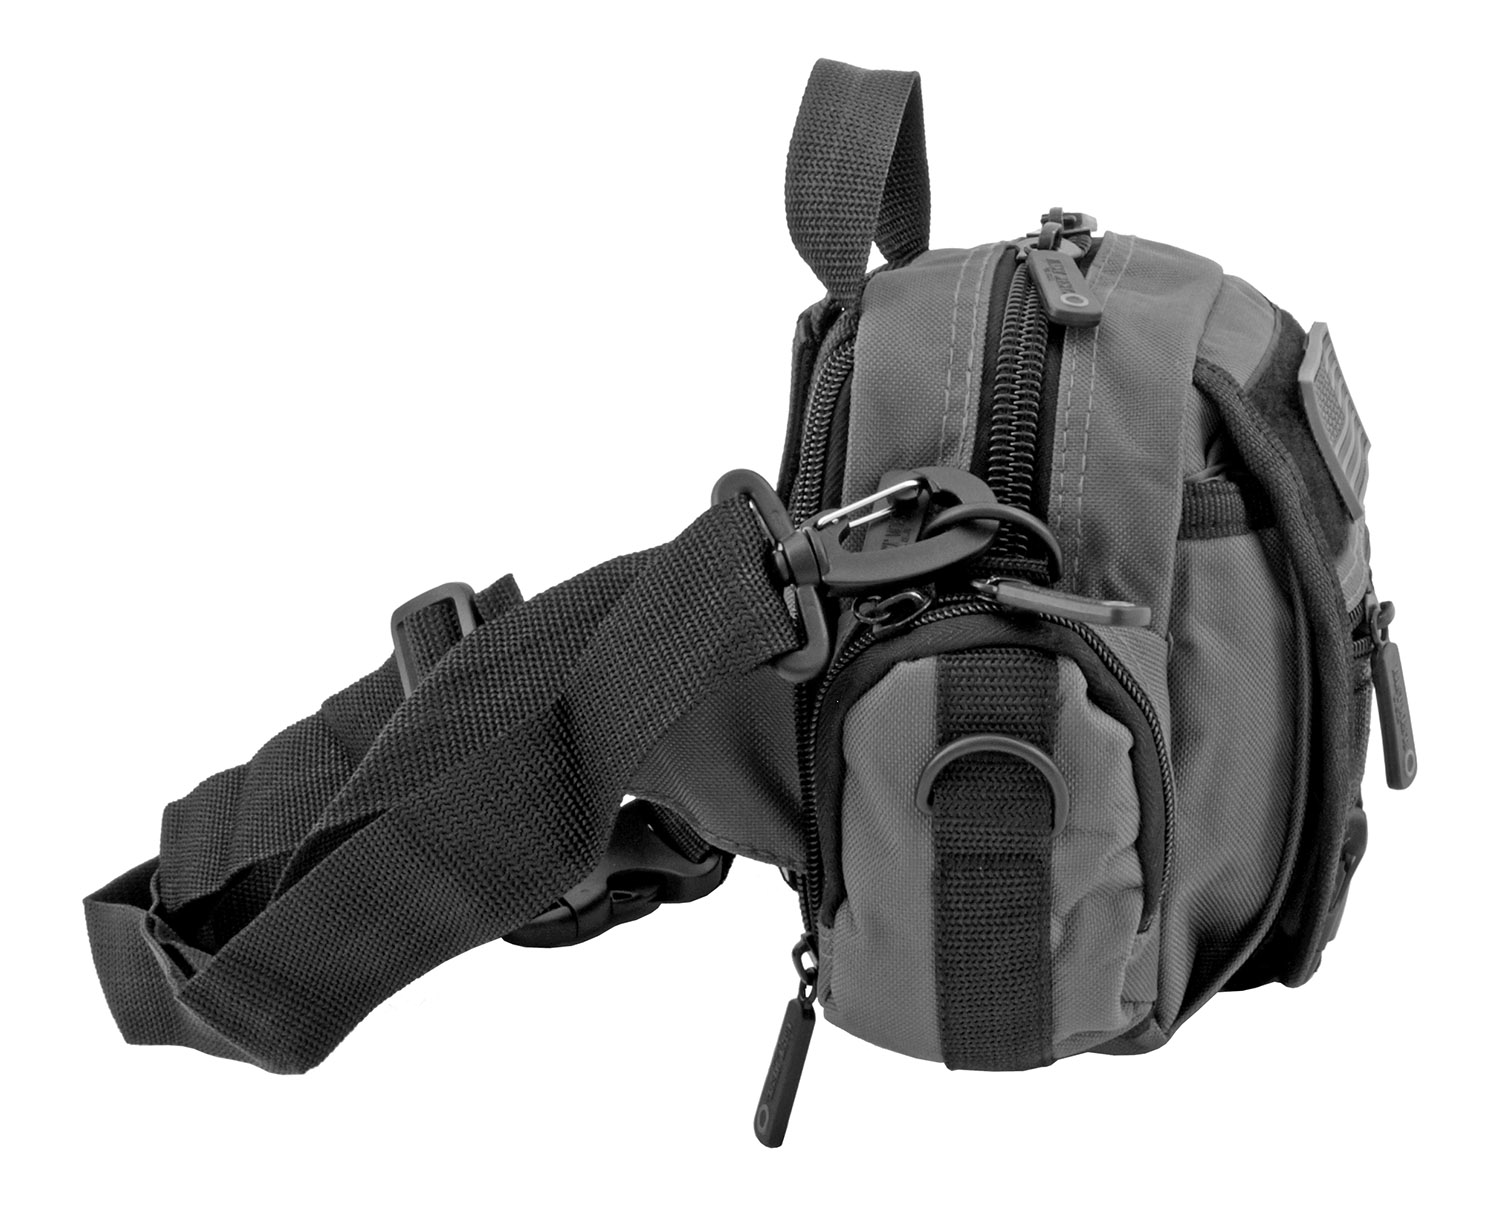 Multi-Functional Tactical Utility Backpack Fanny Pack - Grey